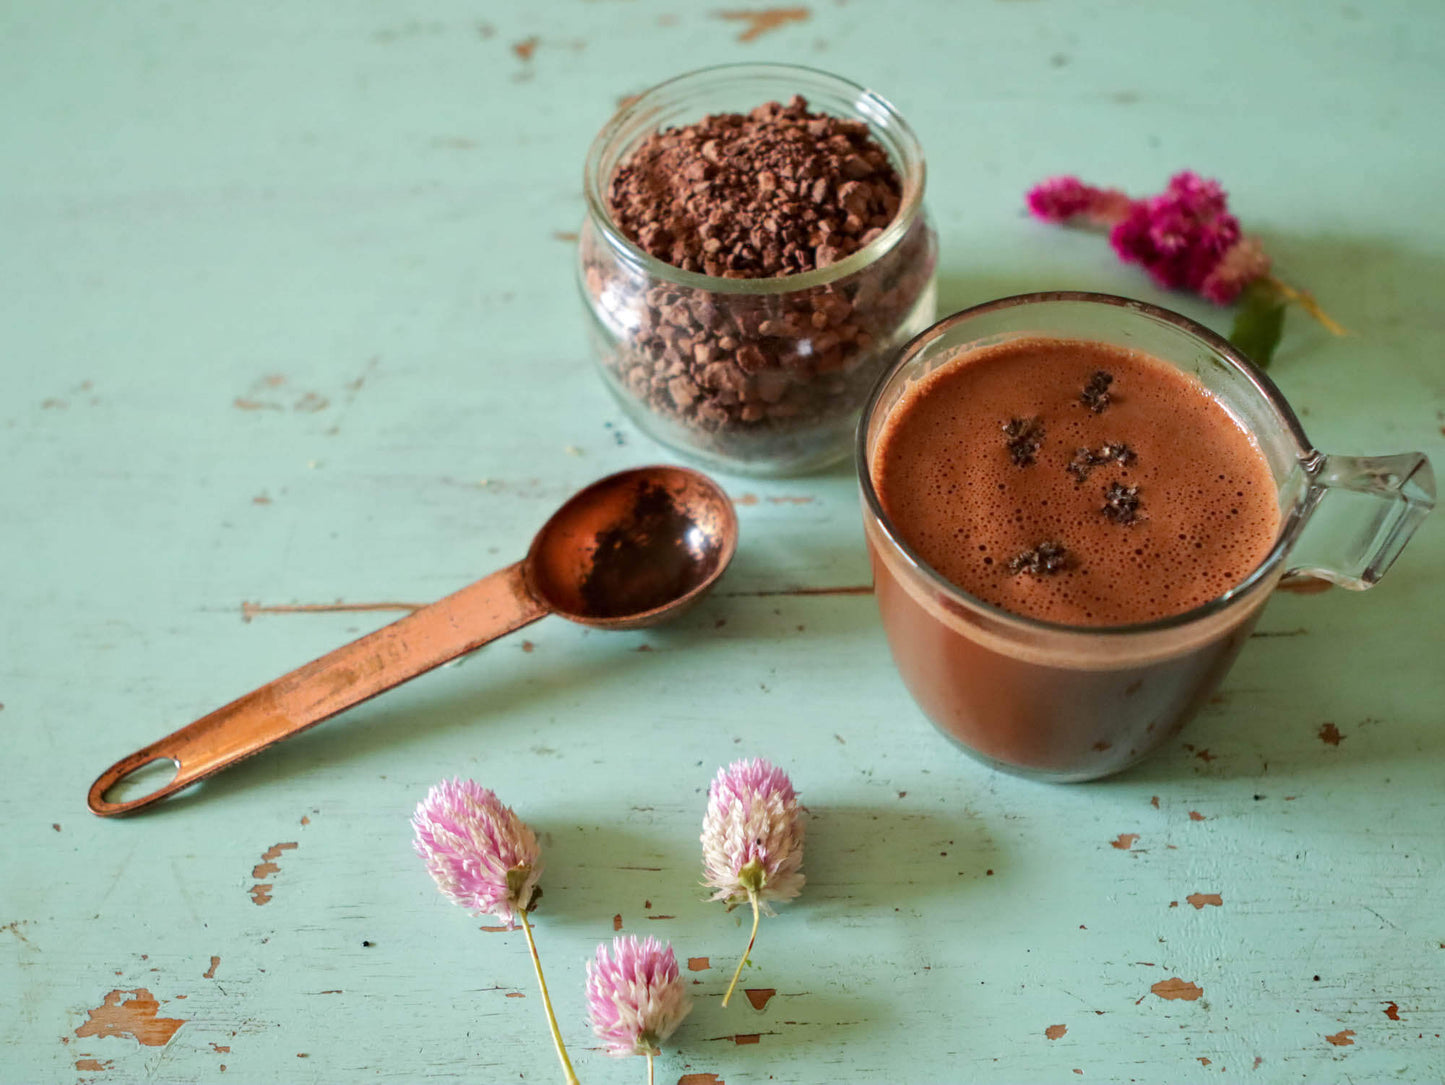 Cup of Ceremonial Cacao with purple flowers on a green table